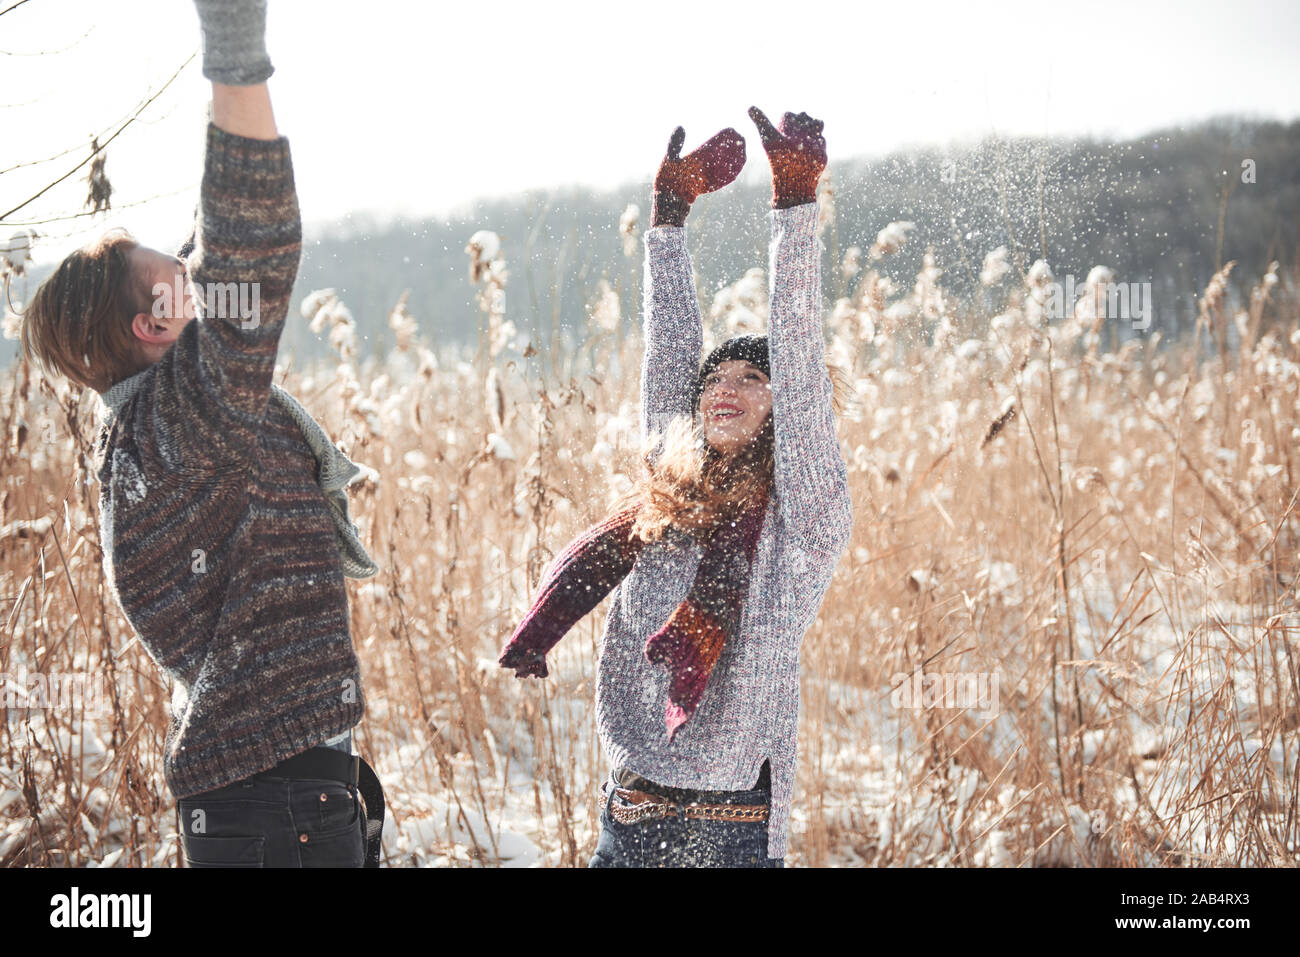 people, season, love and leisure concept - happy couple having fun over winter background Stock Photo